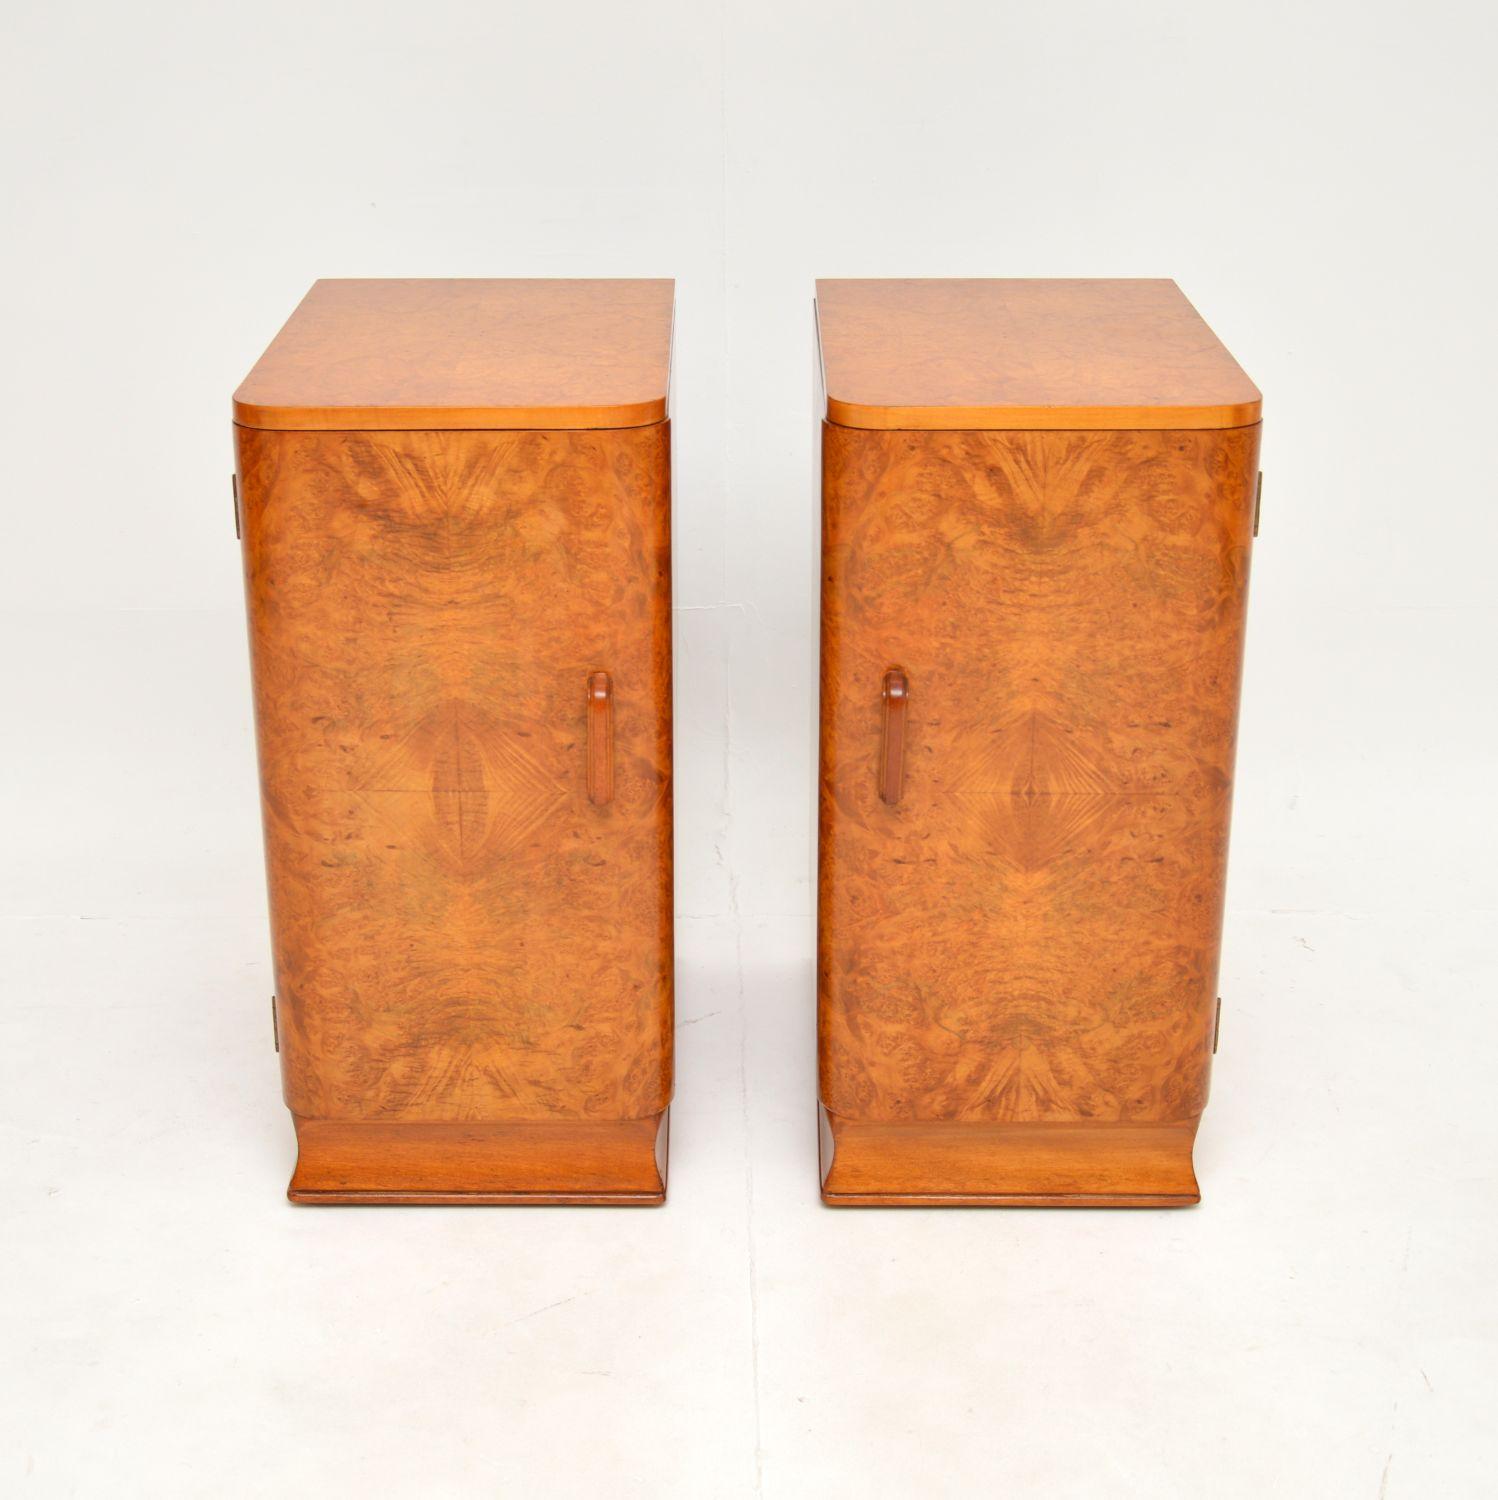 A stylish and extremely well made pair of Art Deco burr walnut bedside cabinets. They were made in England, they date from the 1920-30’s.

The quality is outstanding, they have stunning burr walnut grain patterns, beautifully sculpted handles and